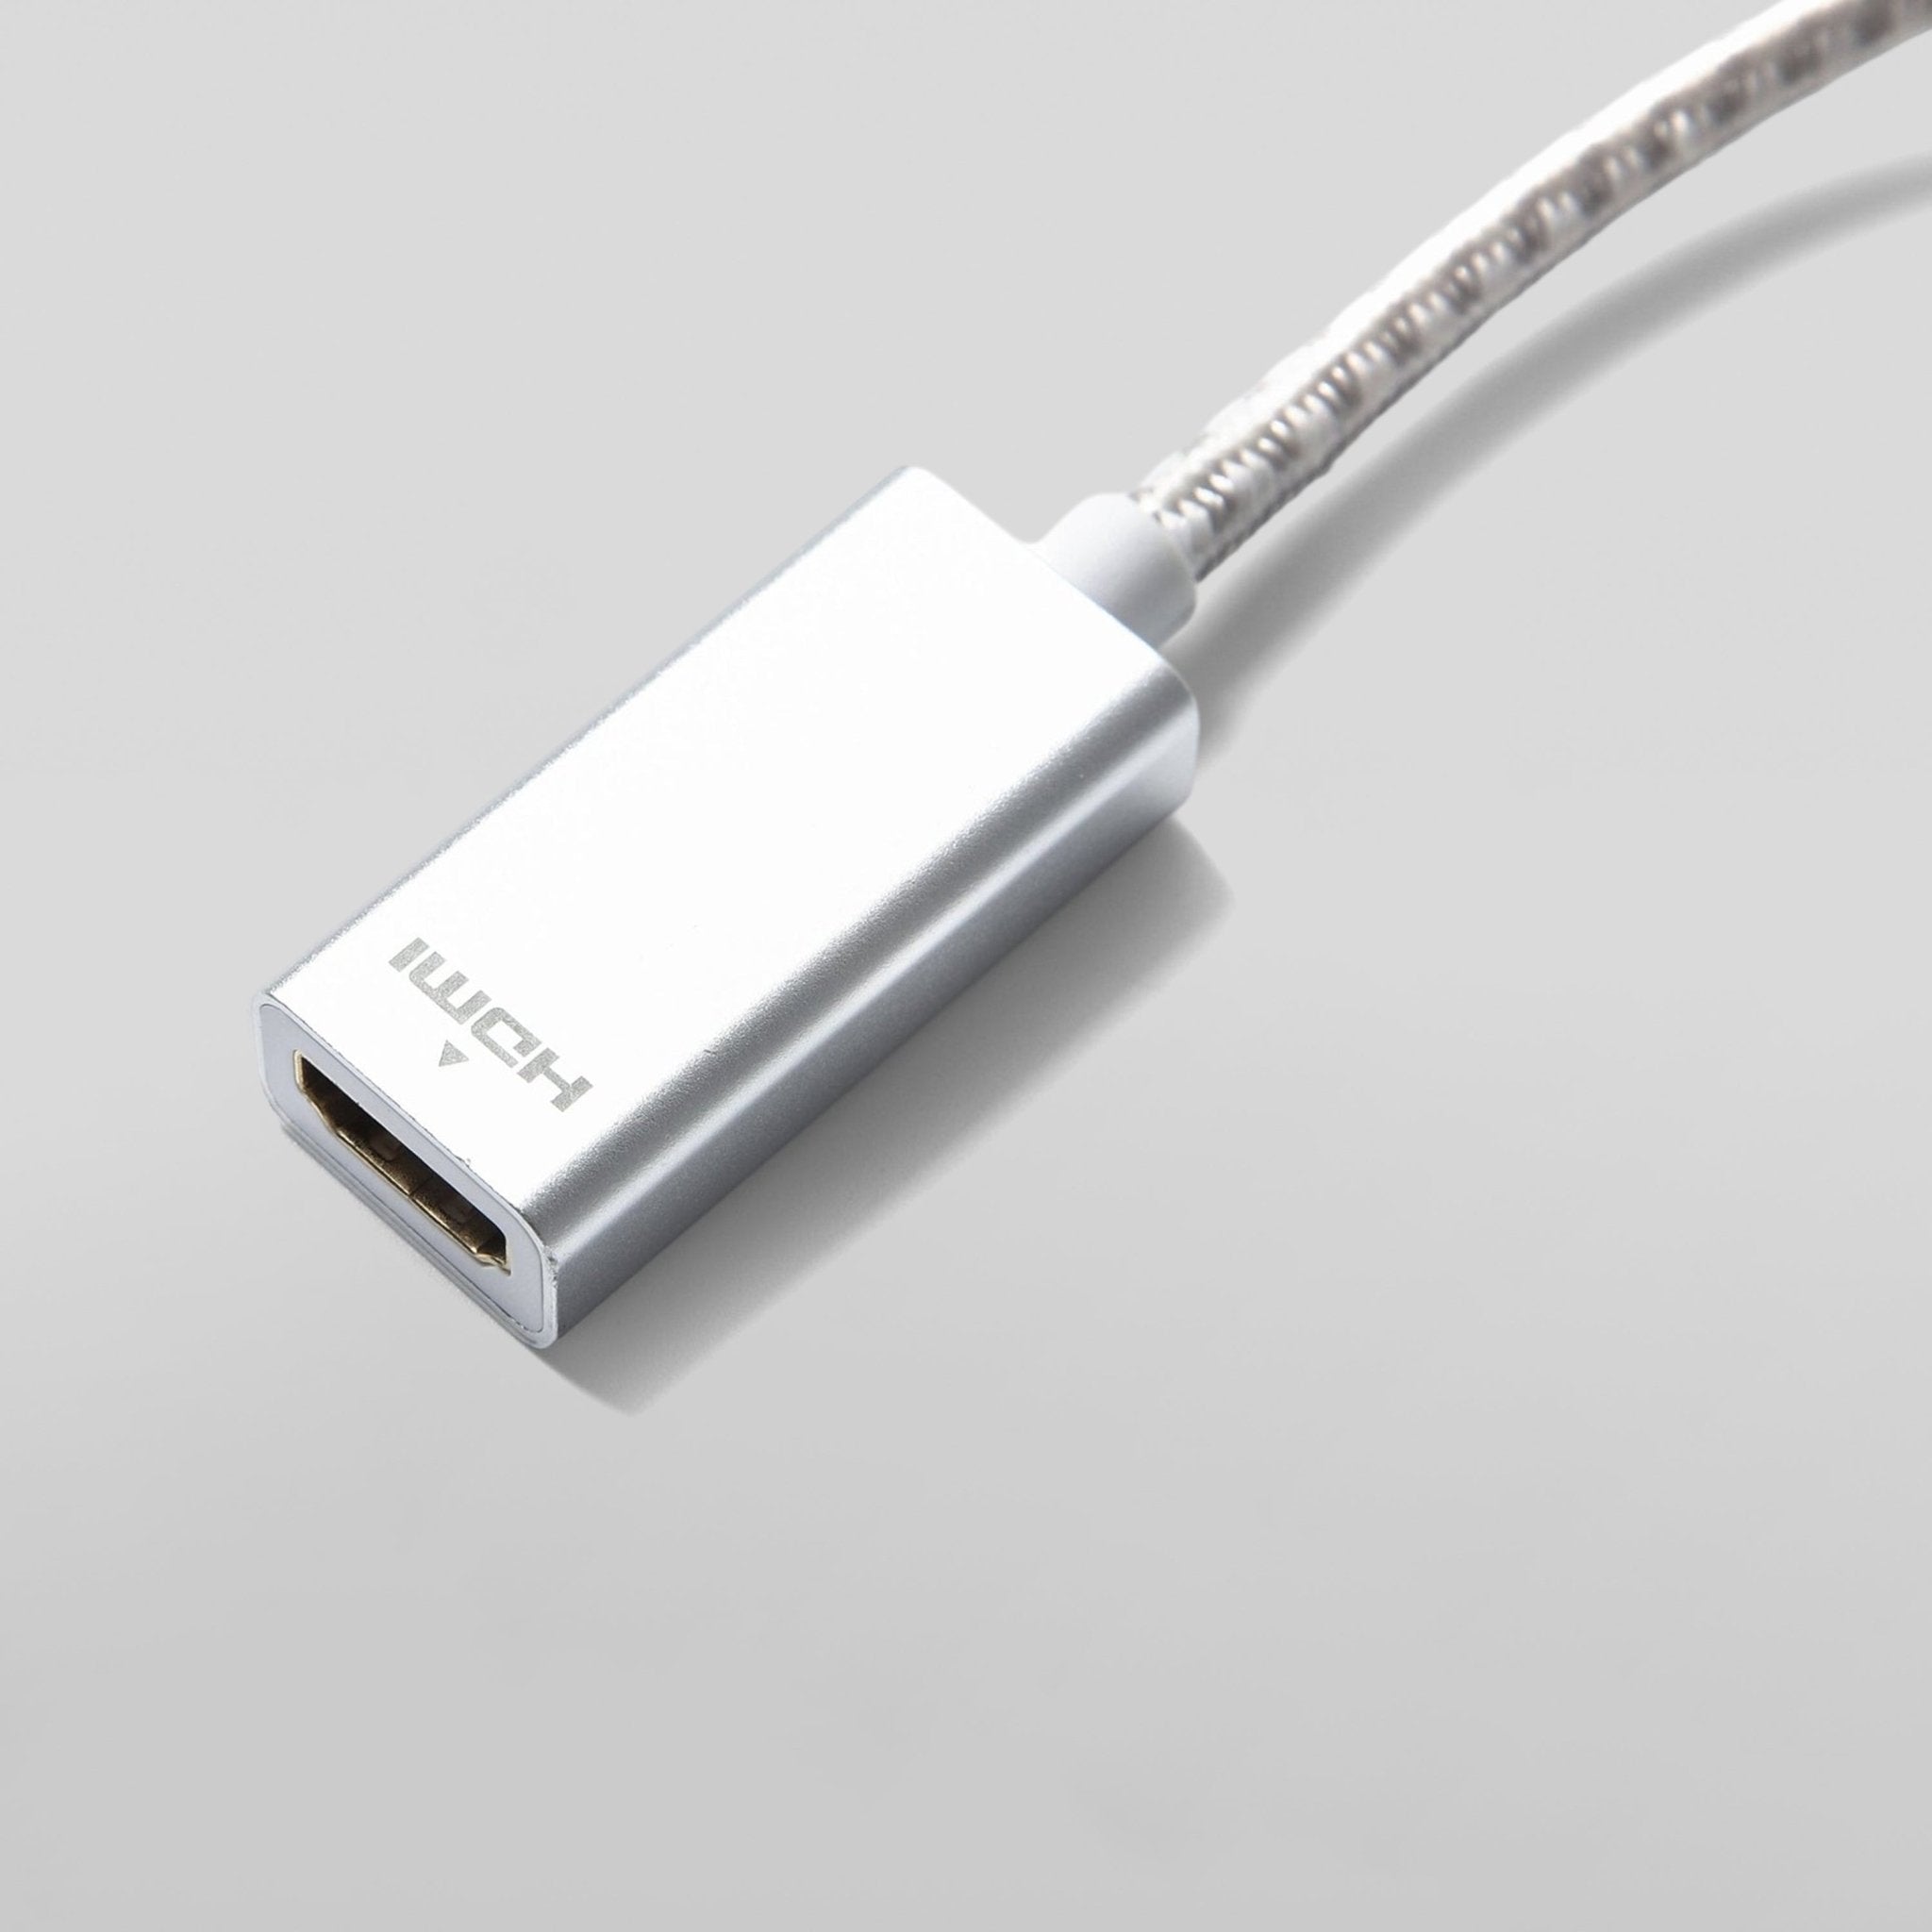 Mini DisplayPort Thunderbolt to HDMI Female Adapter Cable for